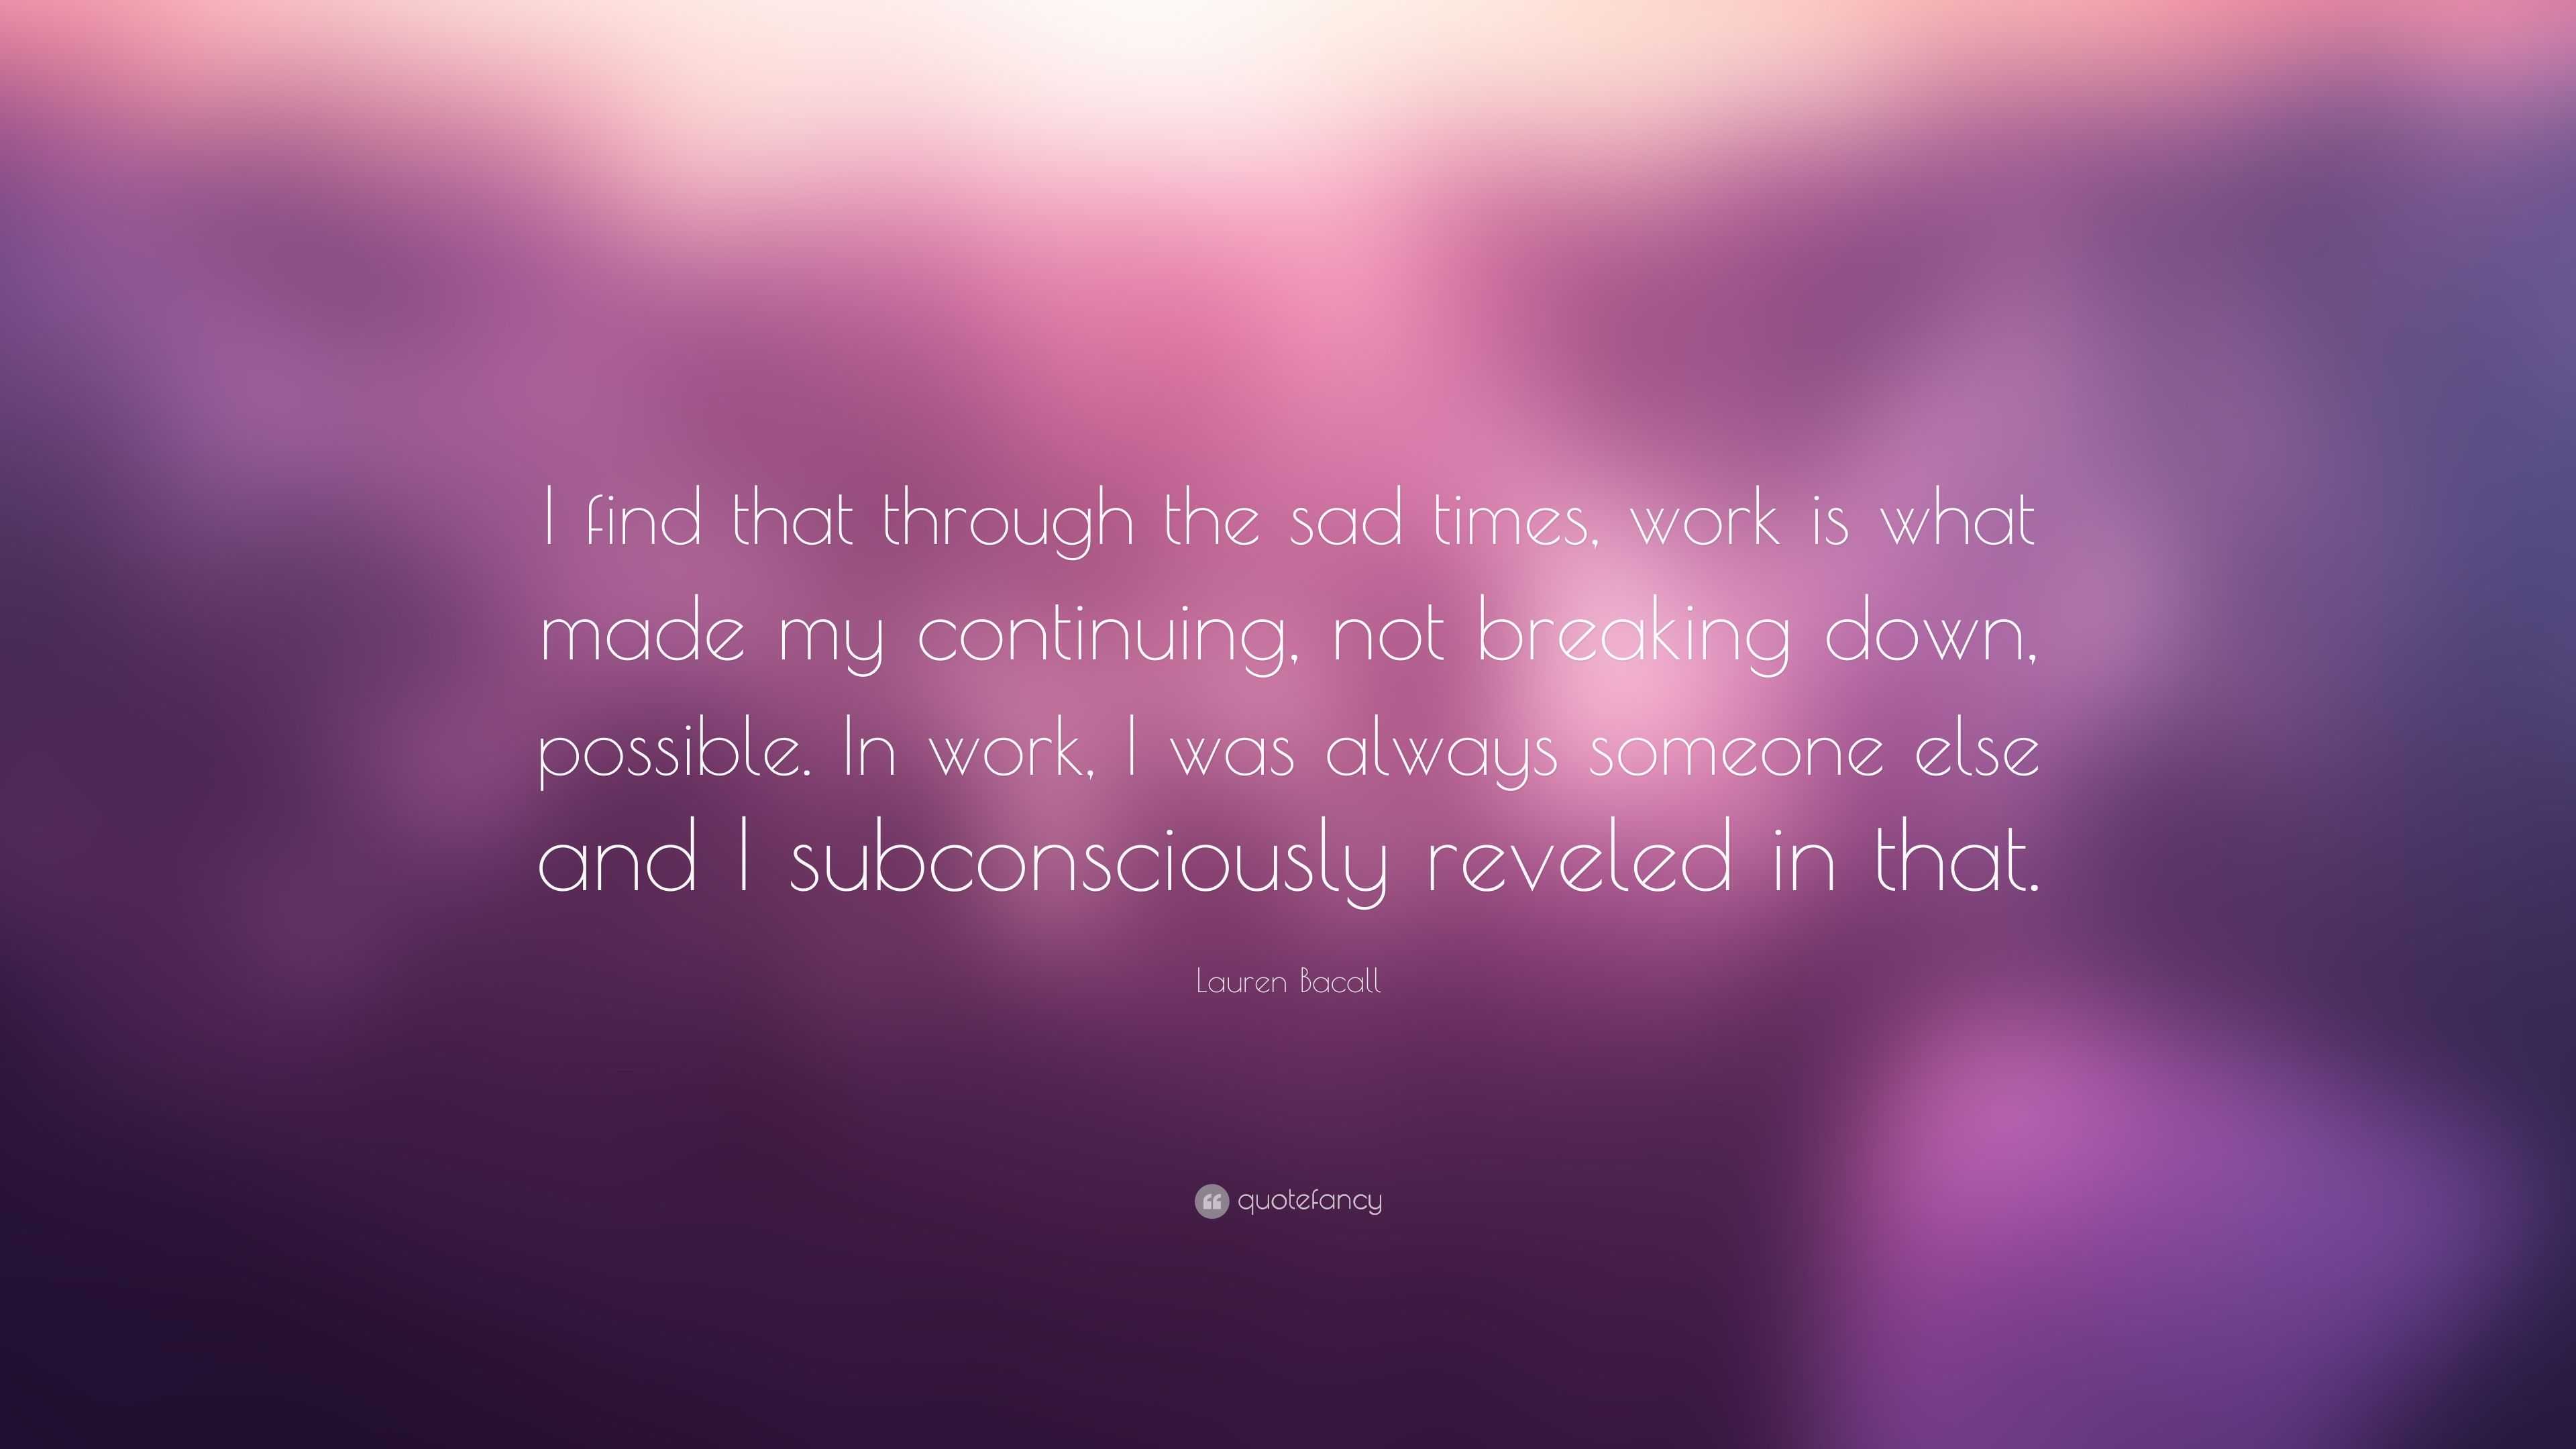 Lauren Bacall Quote: “I find that through the sad times, work is what ...